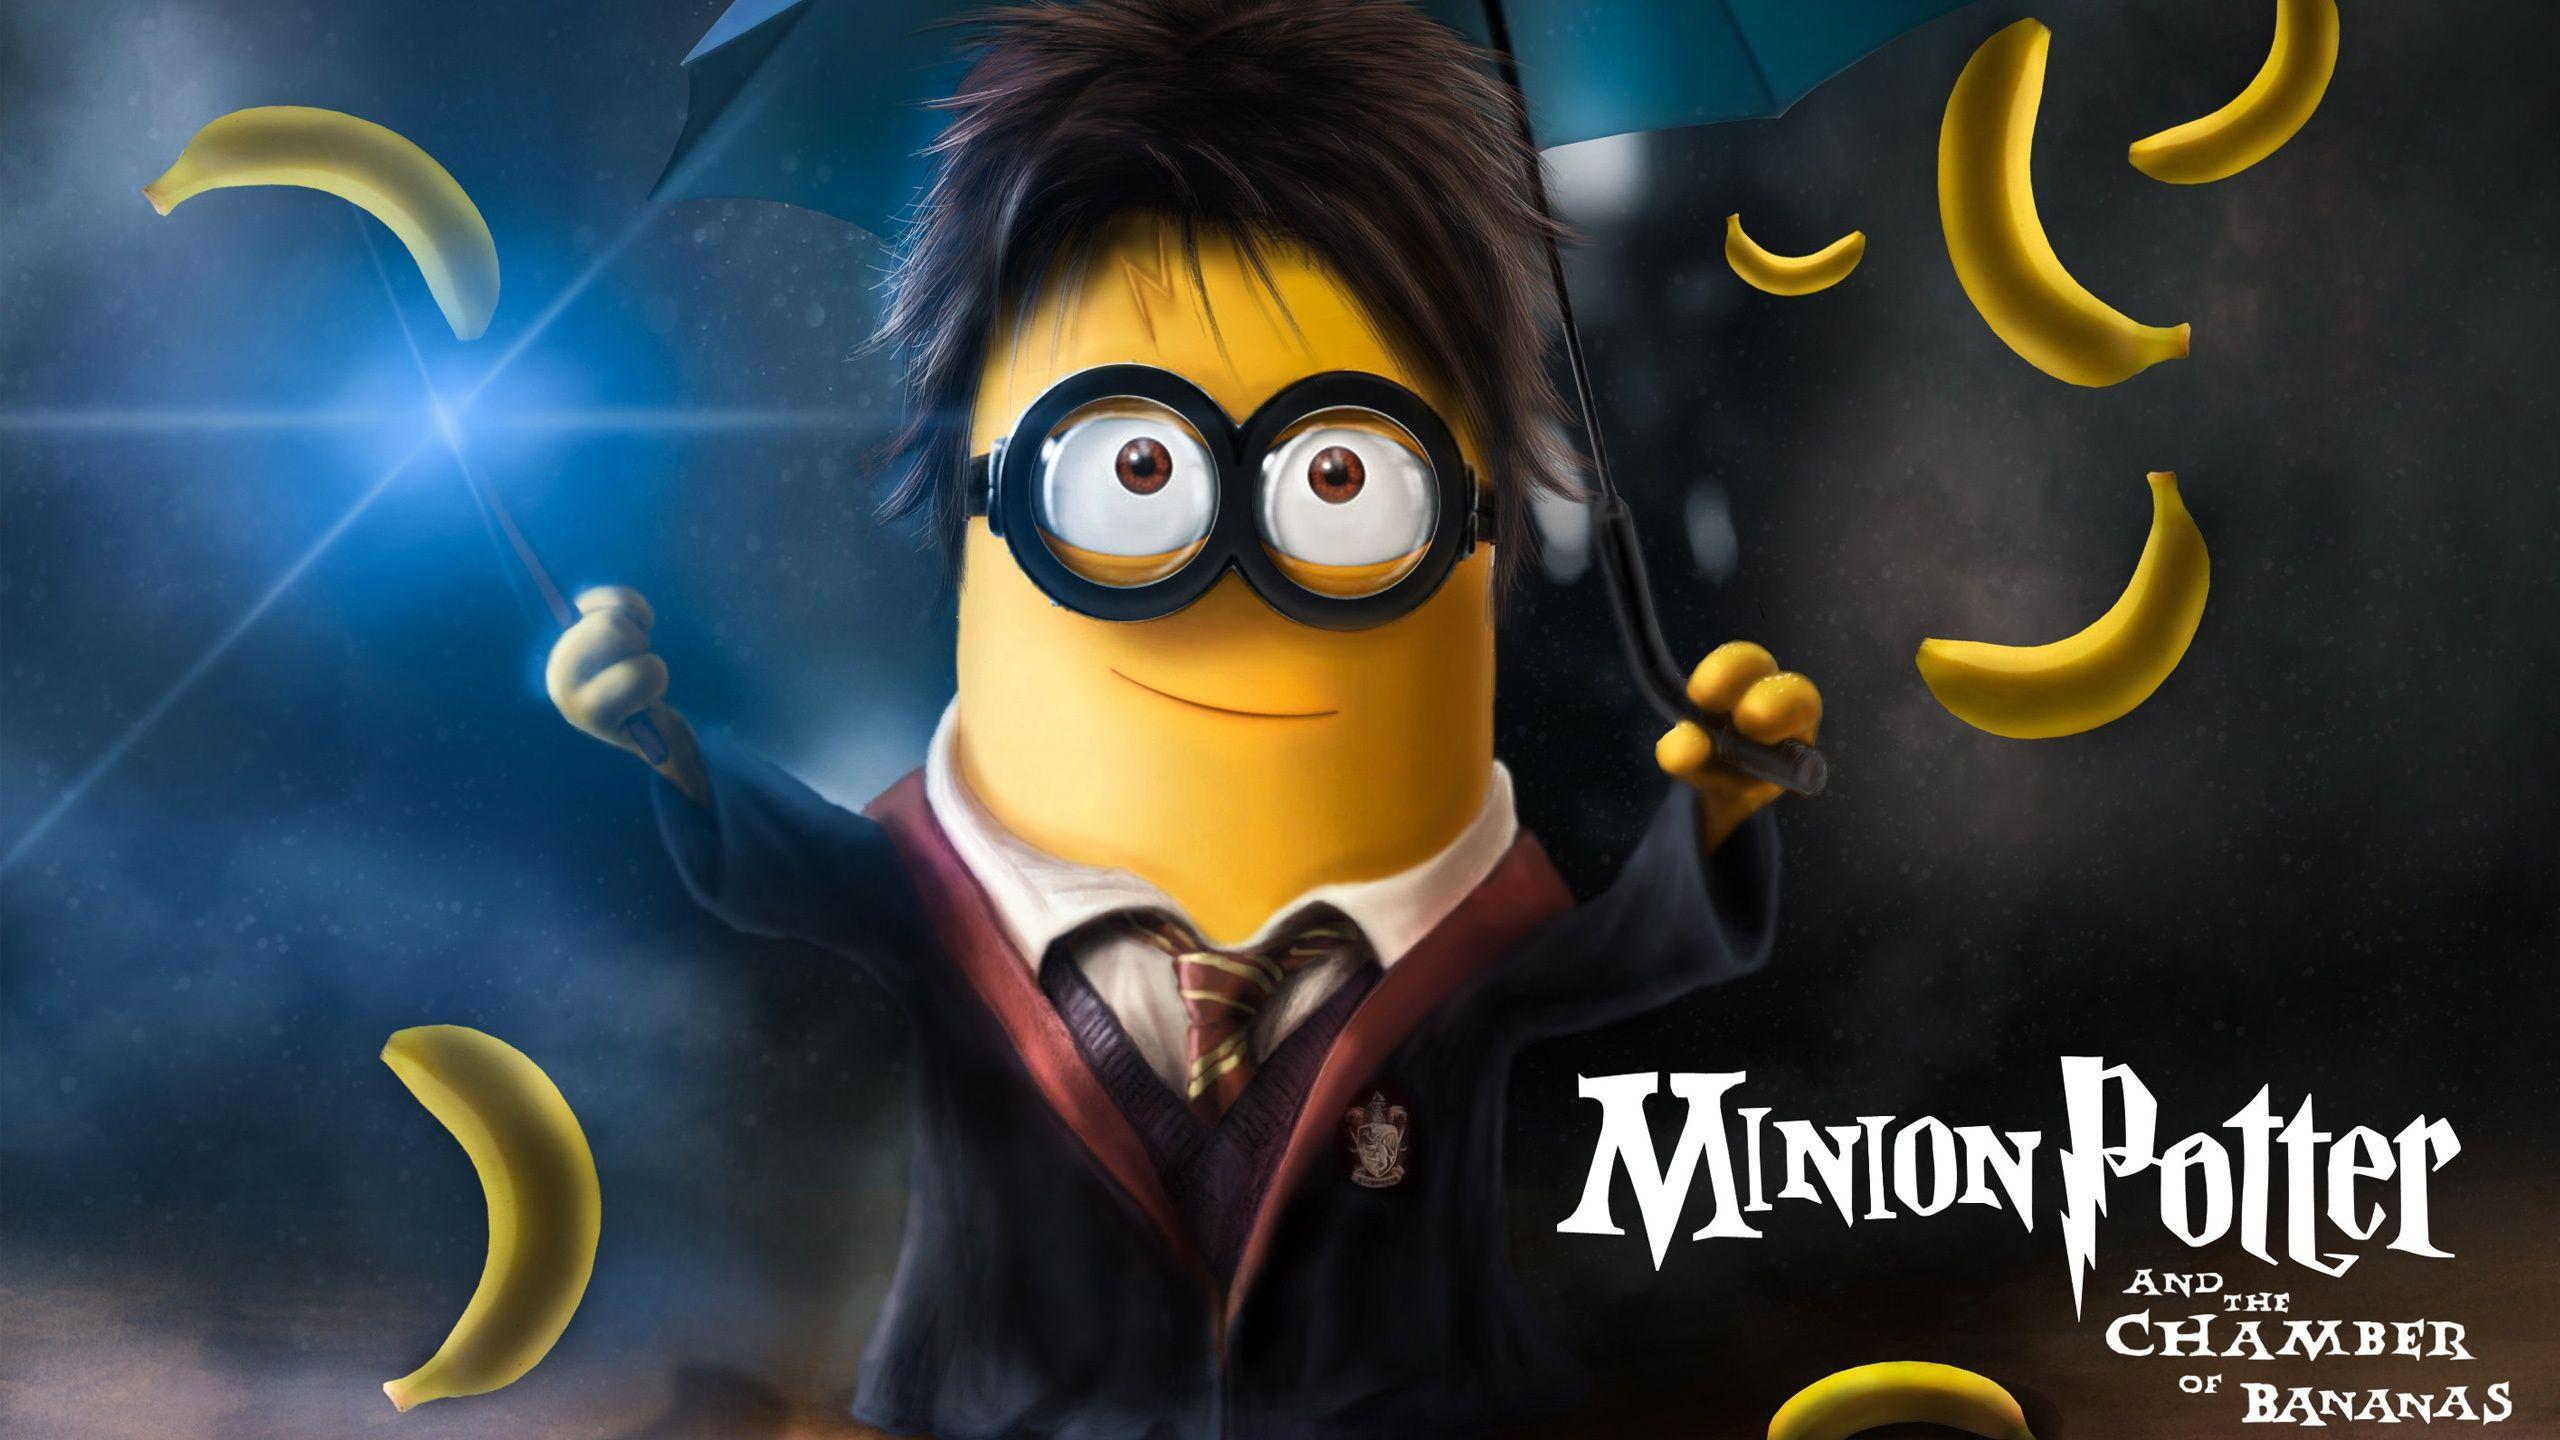 Minion Potter Wallpaper in jpg format for free download